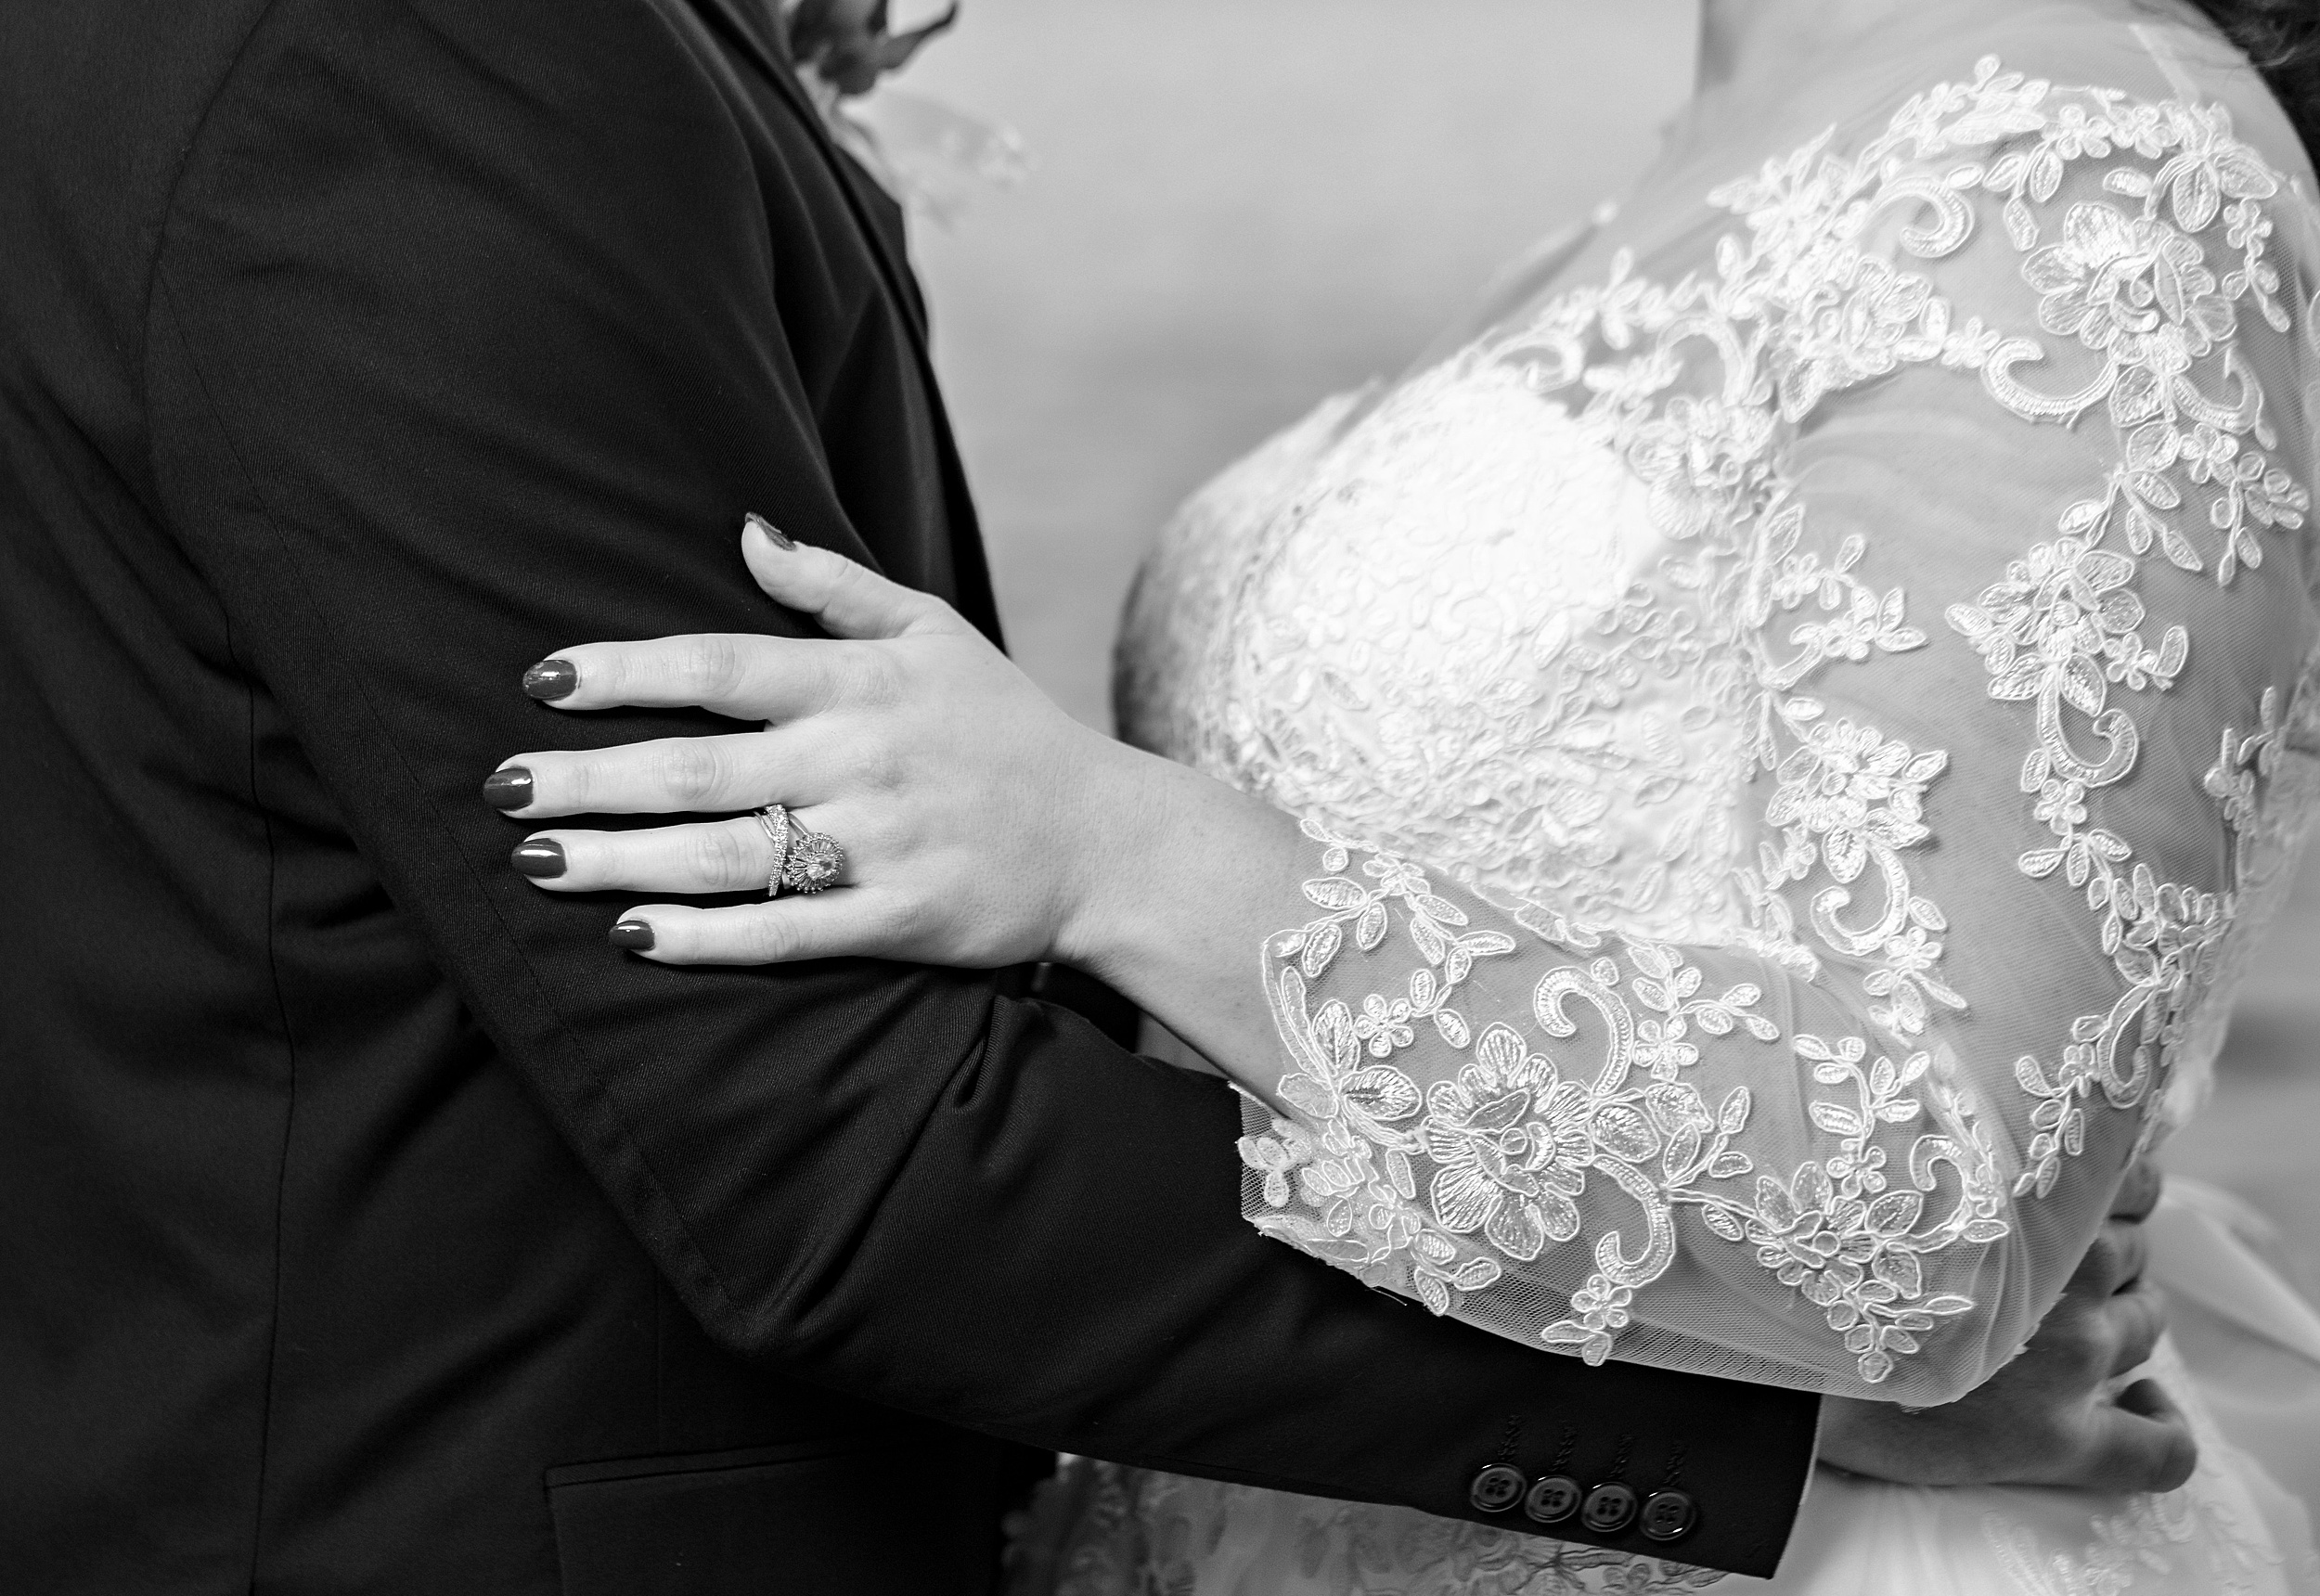 Details of a bride and groom holding each other in a lace embroidered dress and black suit